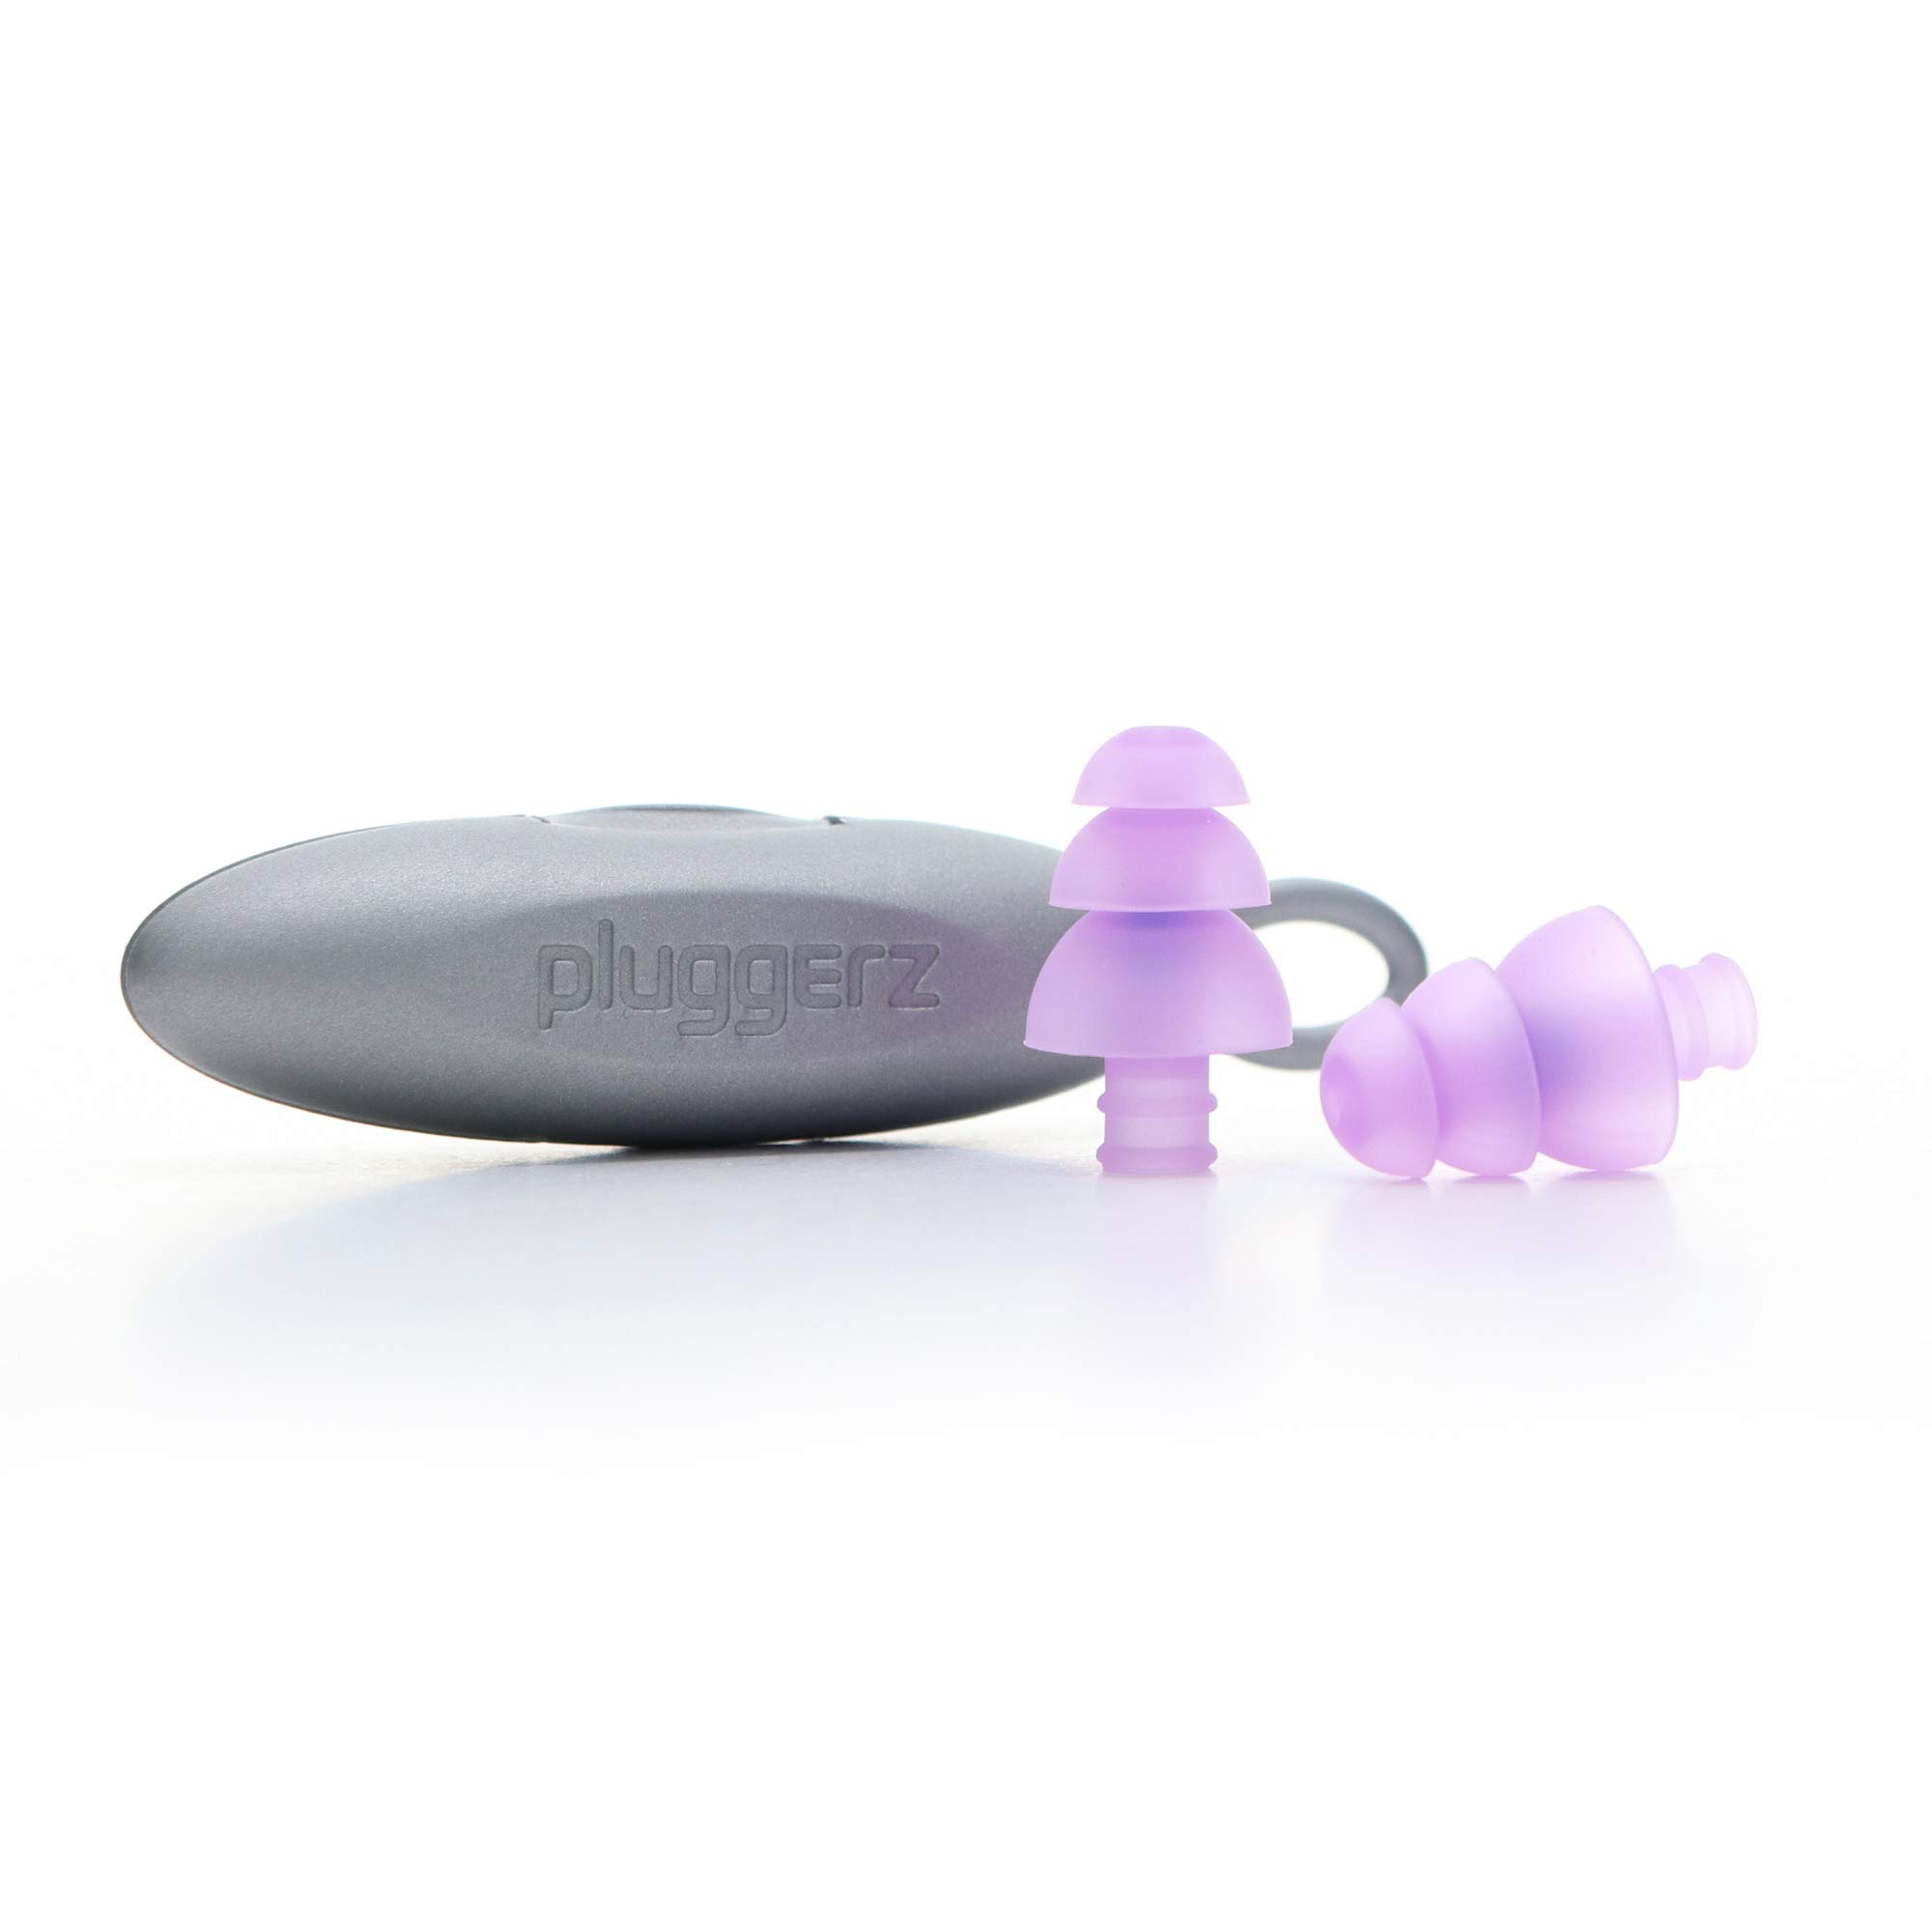 Pluggerz Sleep Earplugs ? Reduces Background Noise - Hypoallergenic and Safe for Your Ears, Comfortable, Perfect for a Long Night?s Sleep - Over 100 Uses - Storage Box Included